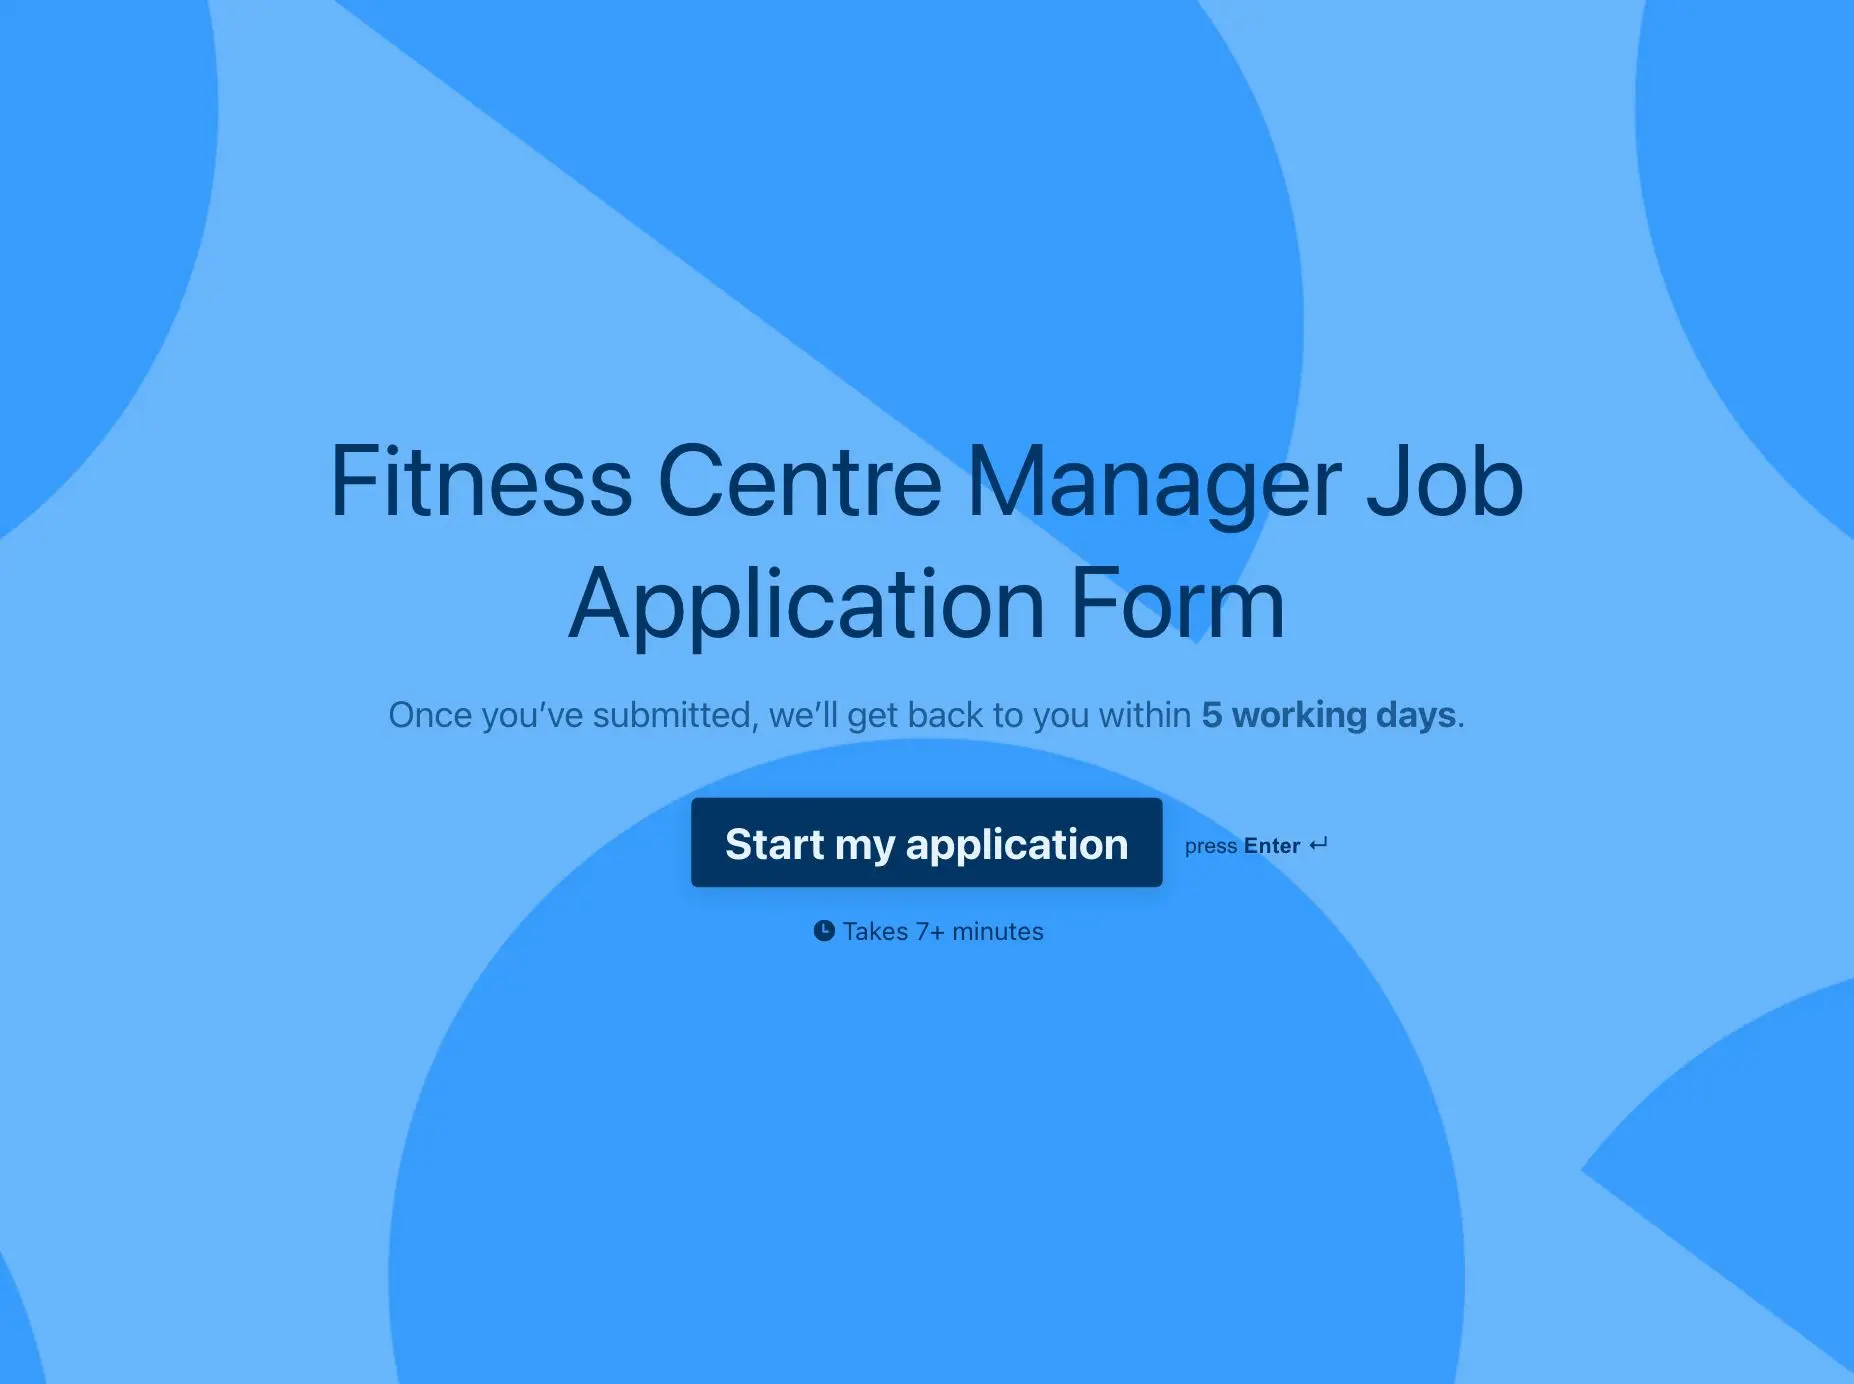 Fitness Centre Manager Job Application Form Template Hero